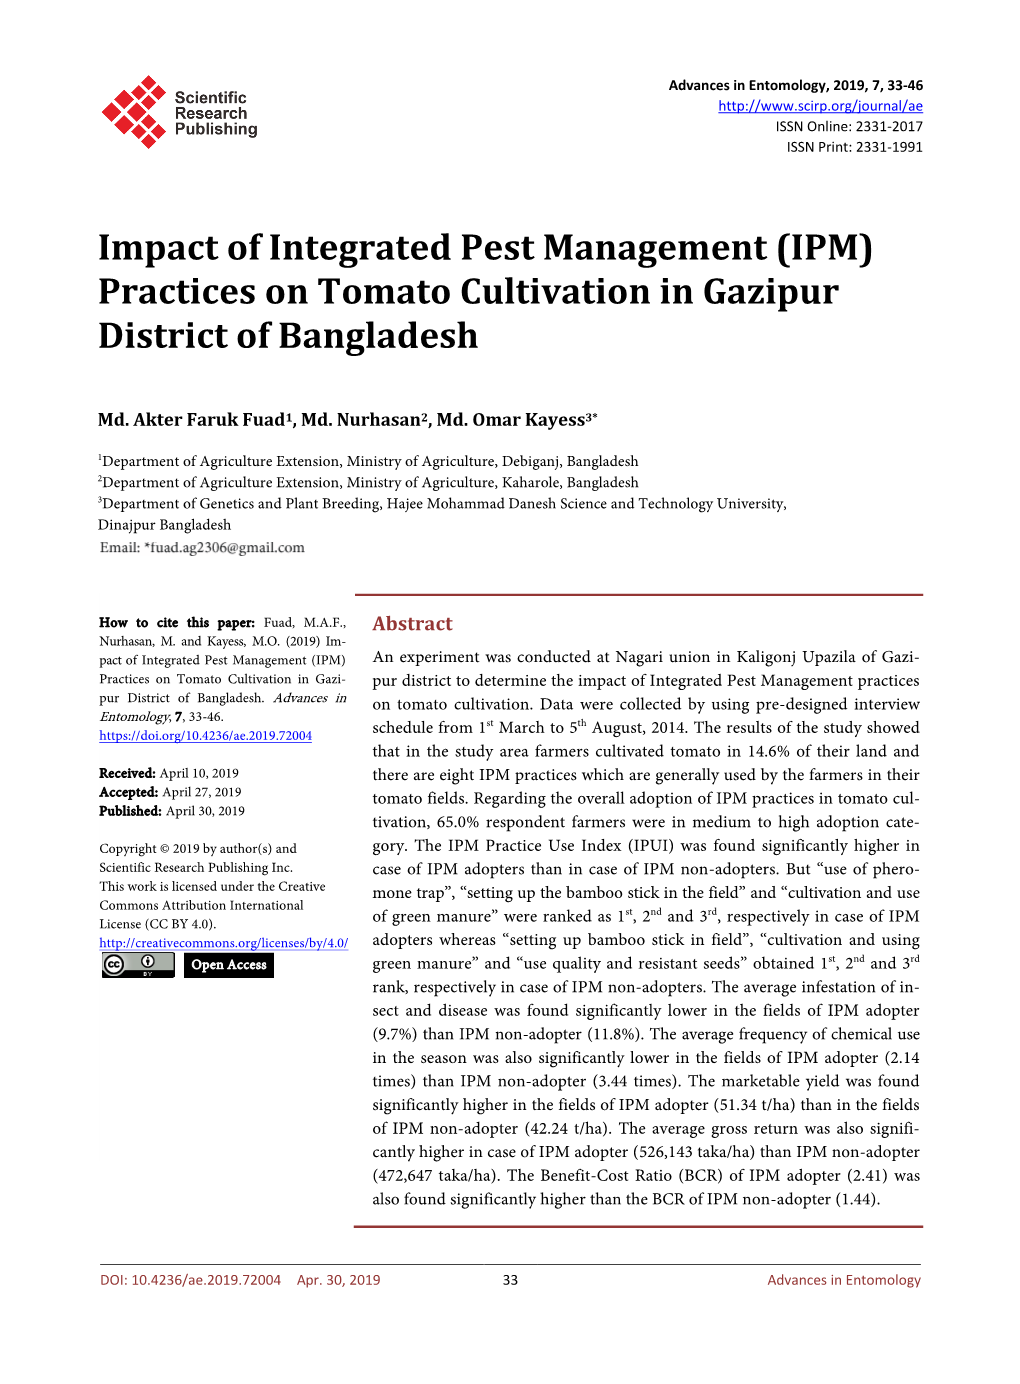 Impact of Integrated Pest Management (IPM) Practices on Tomato Cultivation in Gazipur District of Bangladesh